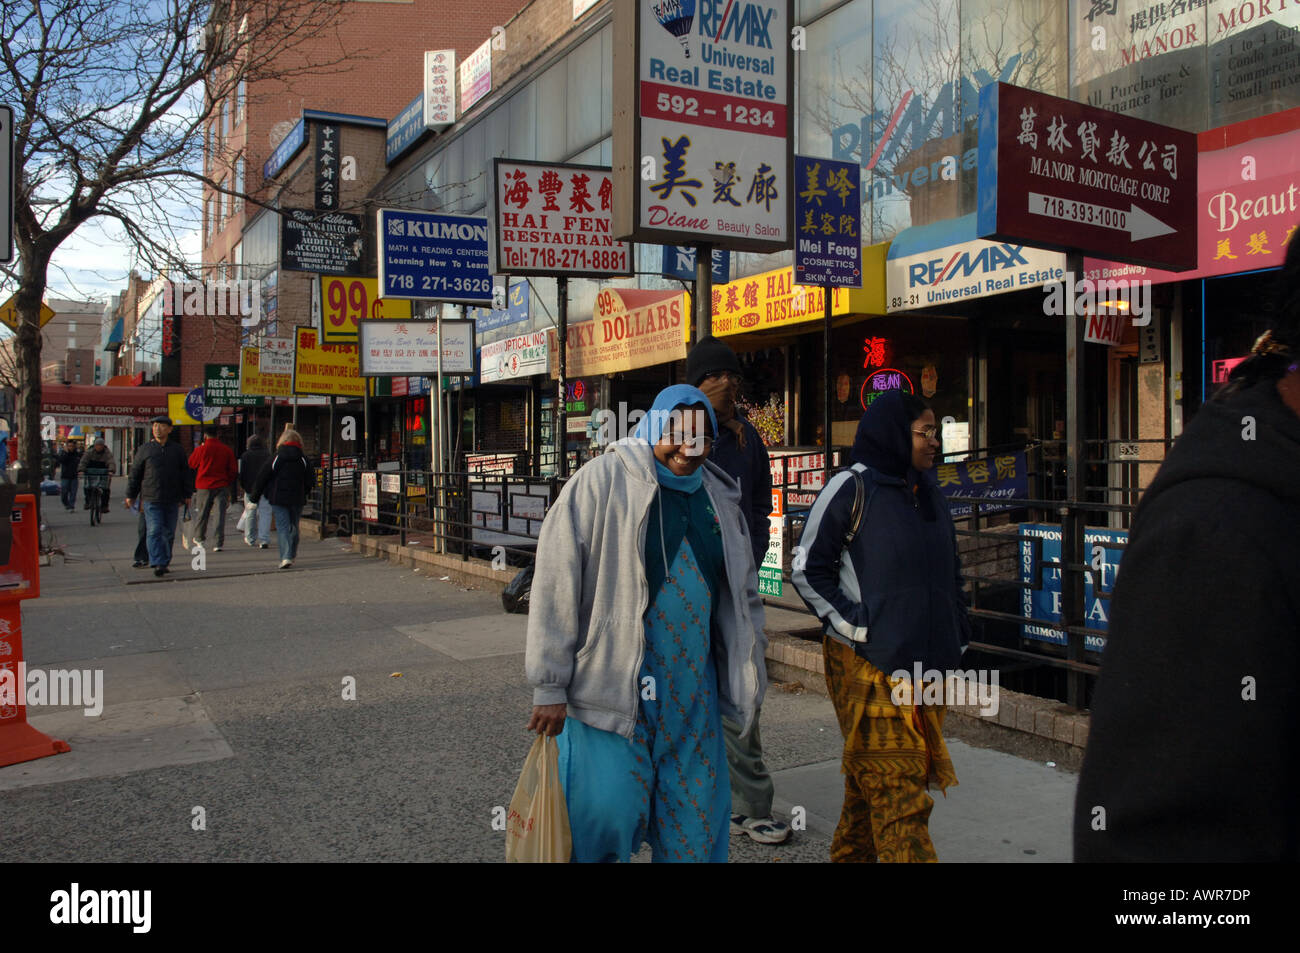 The multi cultural Elmhurst Queens neighborhood in NYC Stock Photo